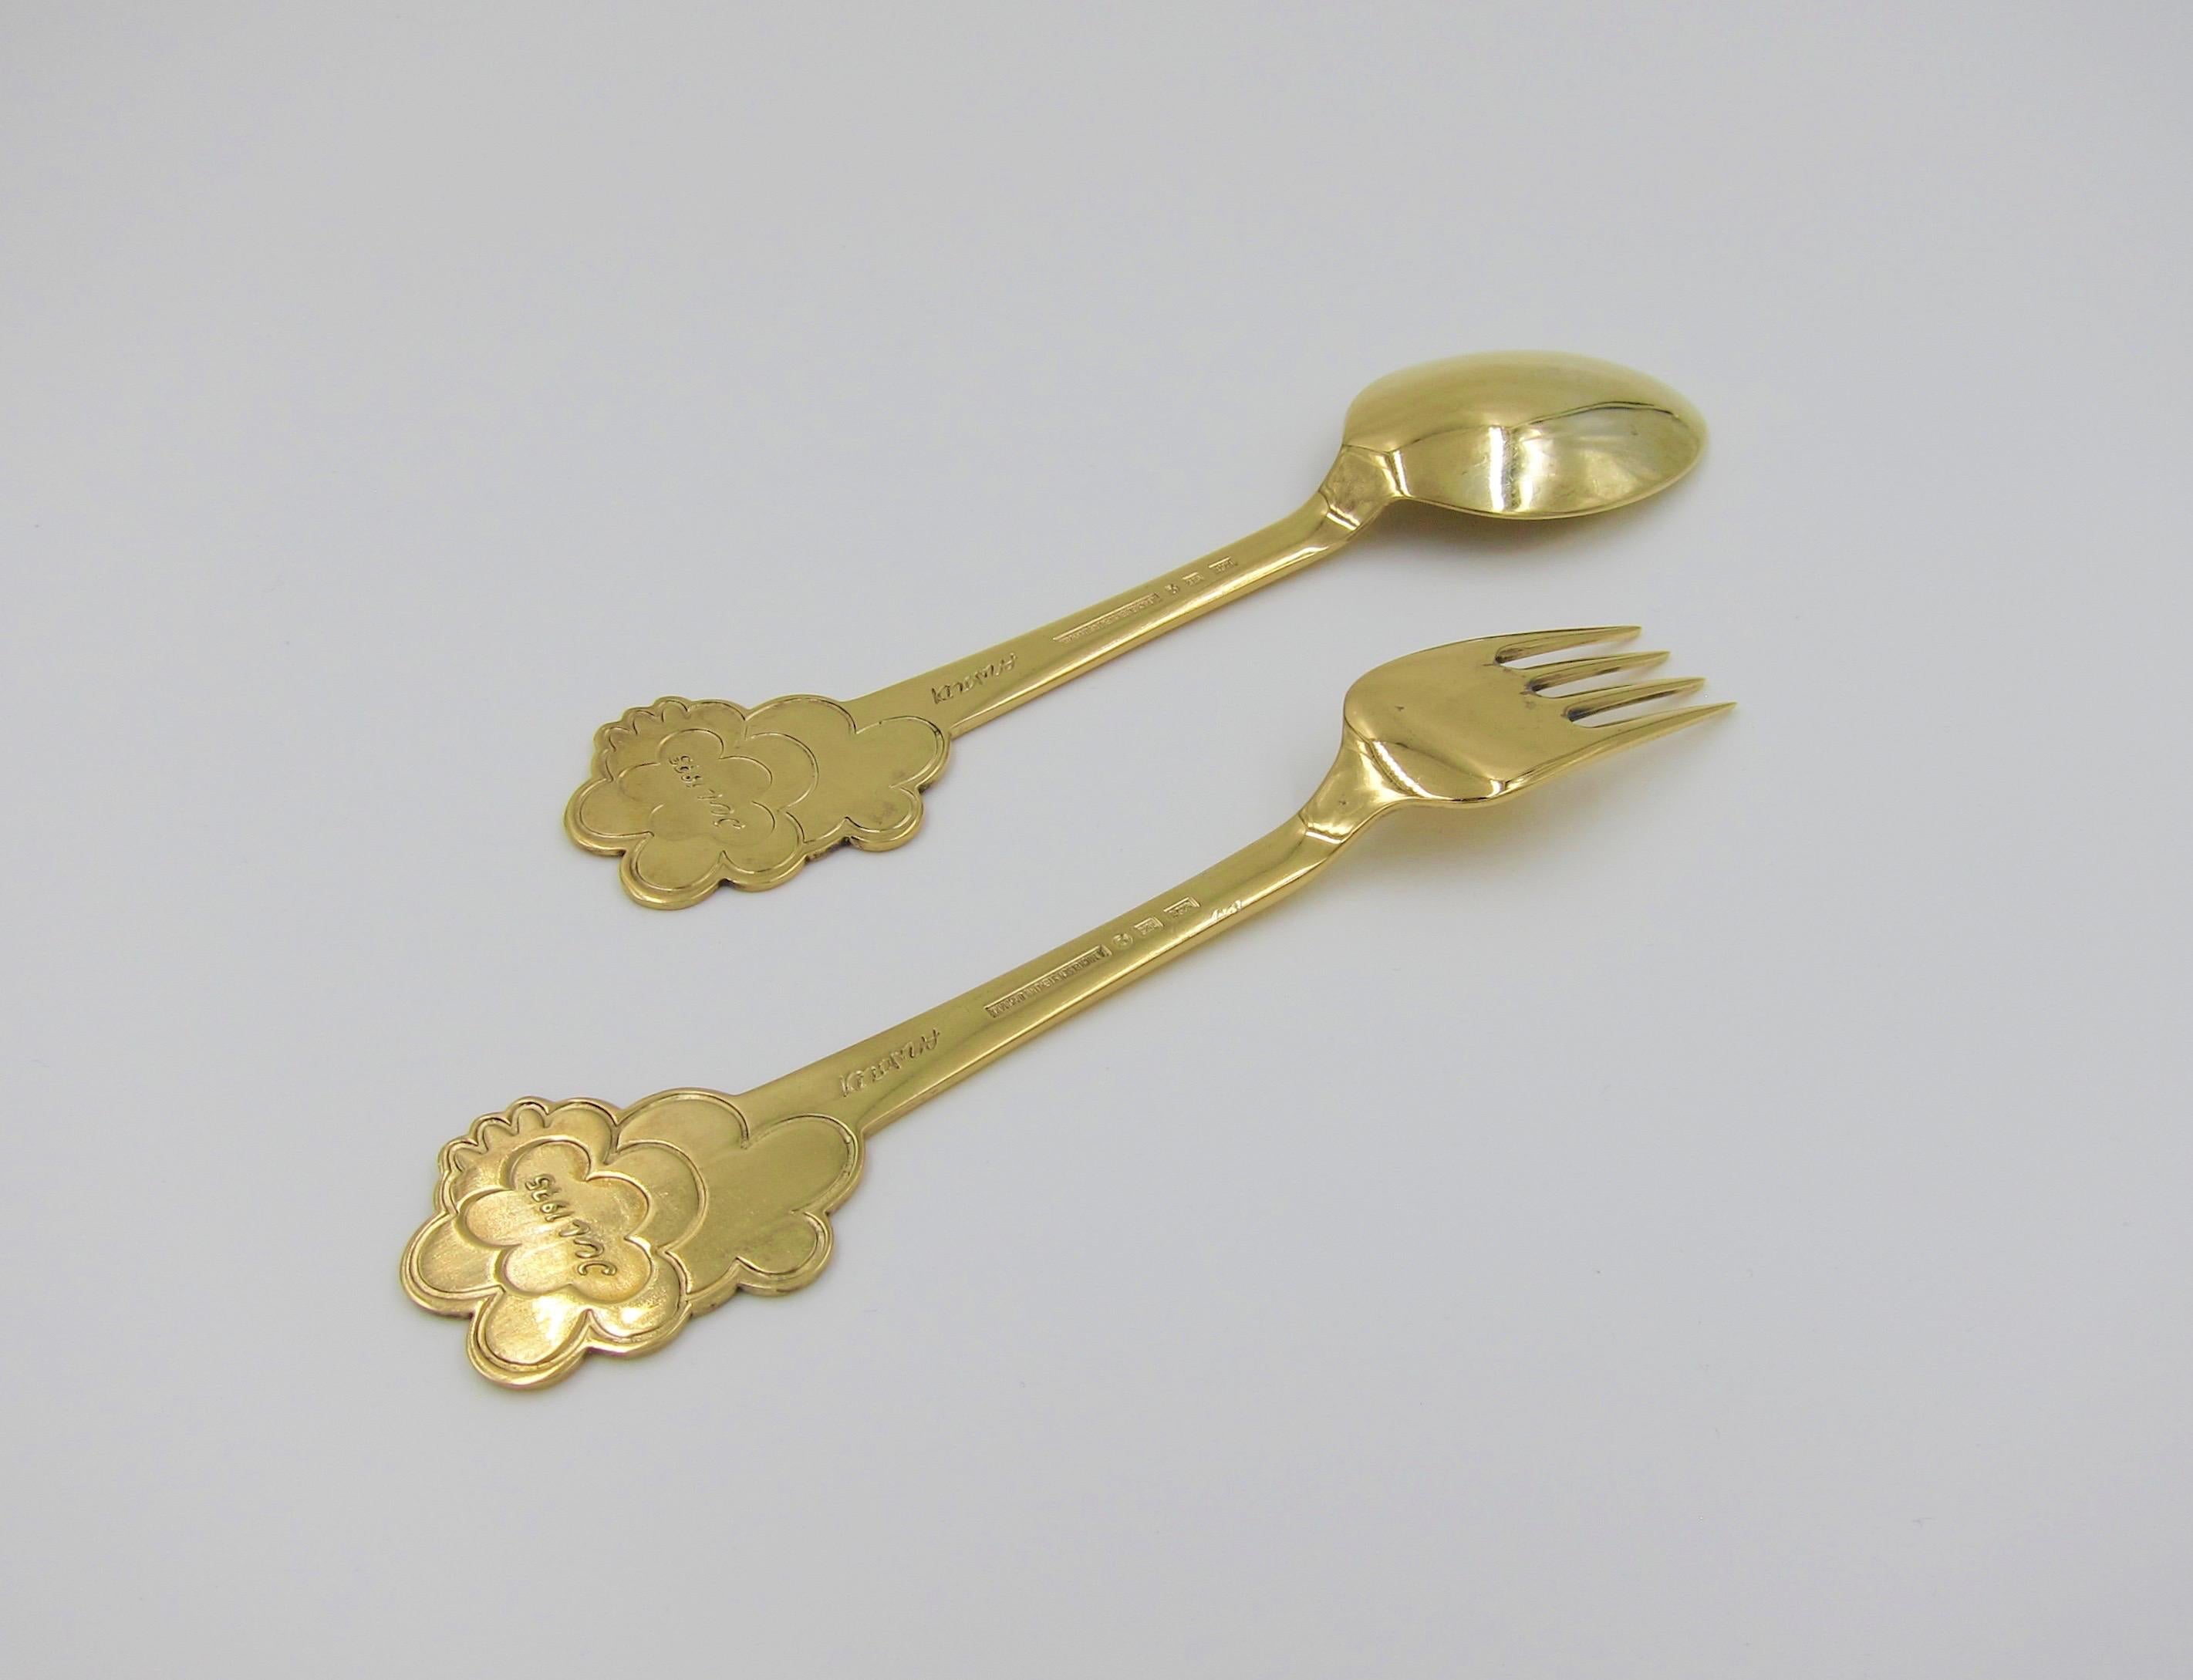 1975 Anton Michelsen Gilded Silver and Enamel Christmas Fork and Spoon Set 1